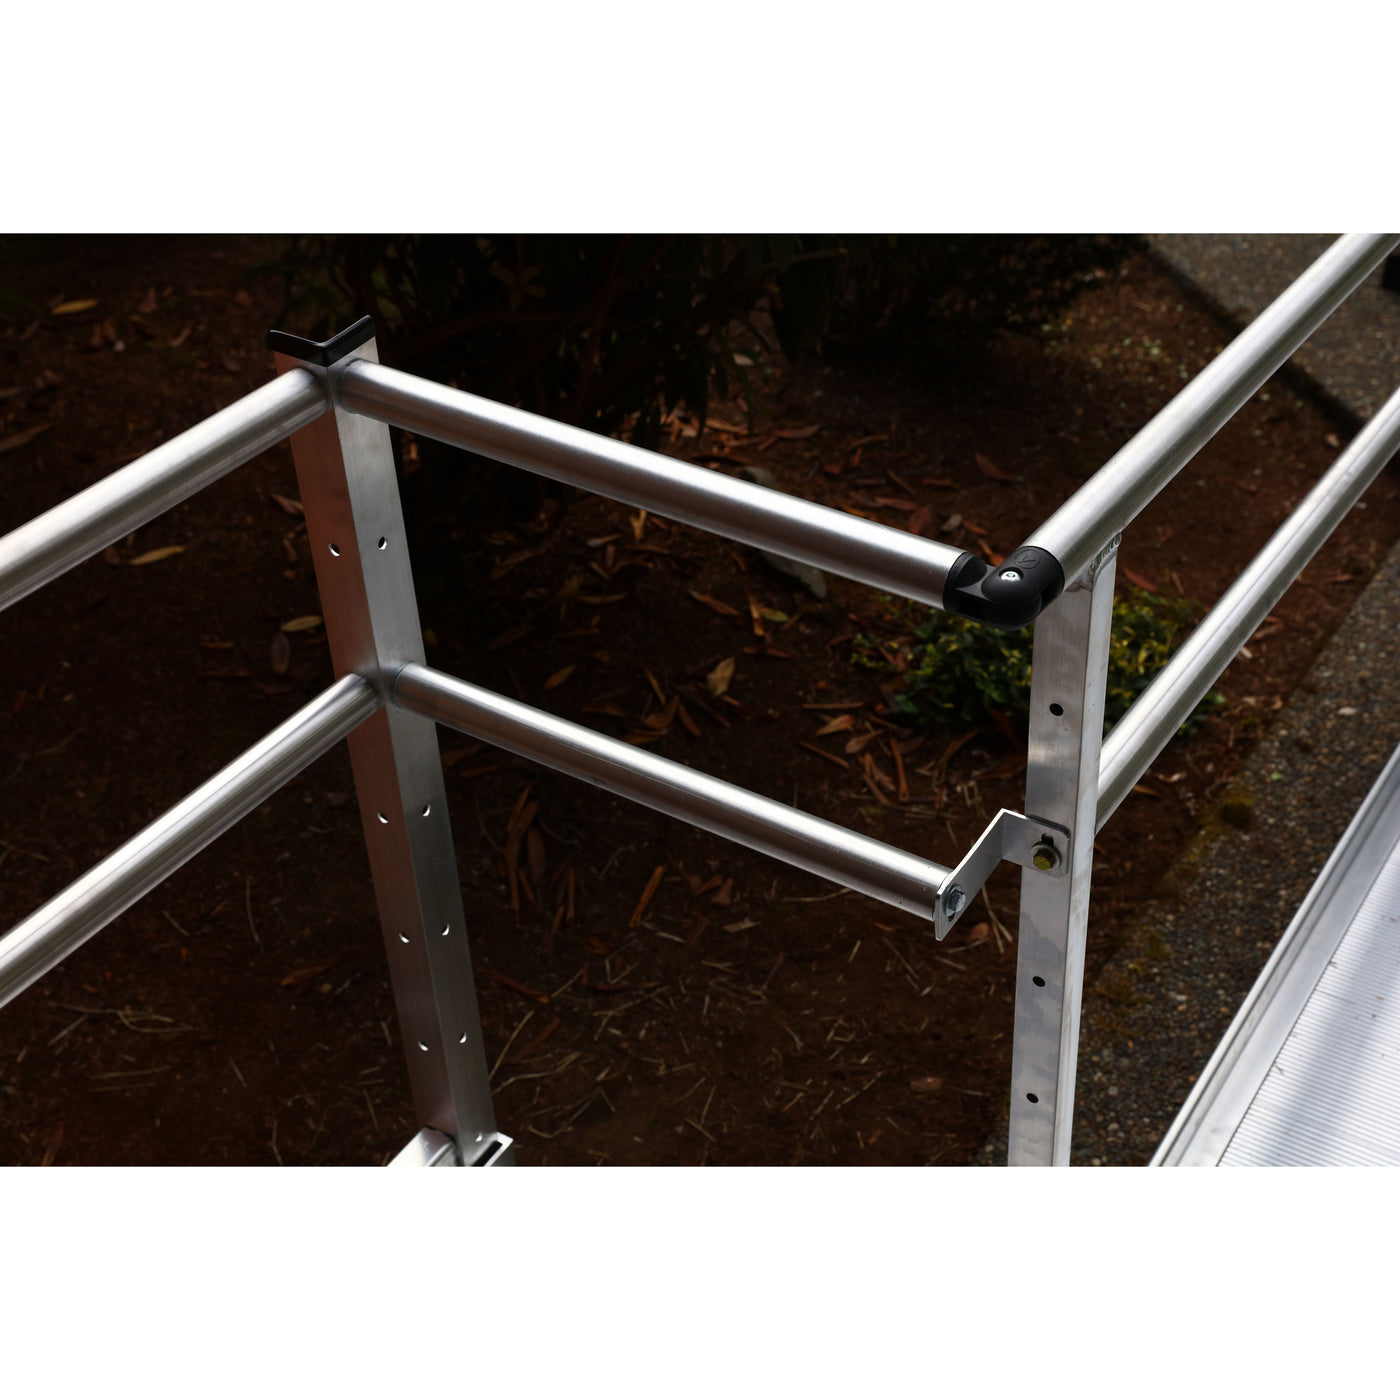 EZ-ACCESS Gateway 3G Portable Solid Surface Mobility Ramps with Vertical Picket Handrails - 6 Foot